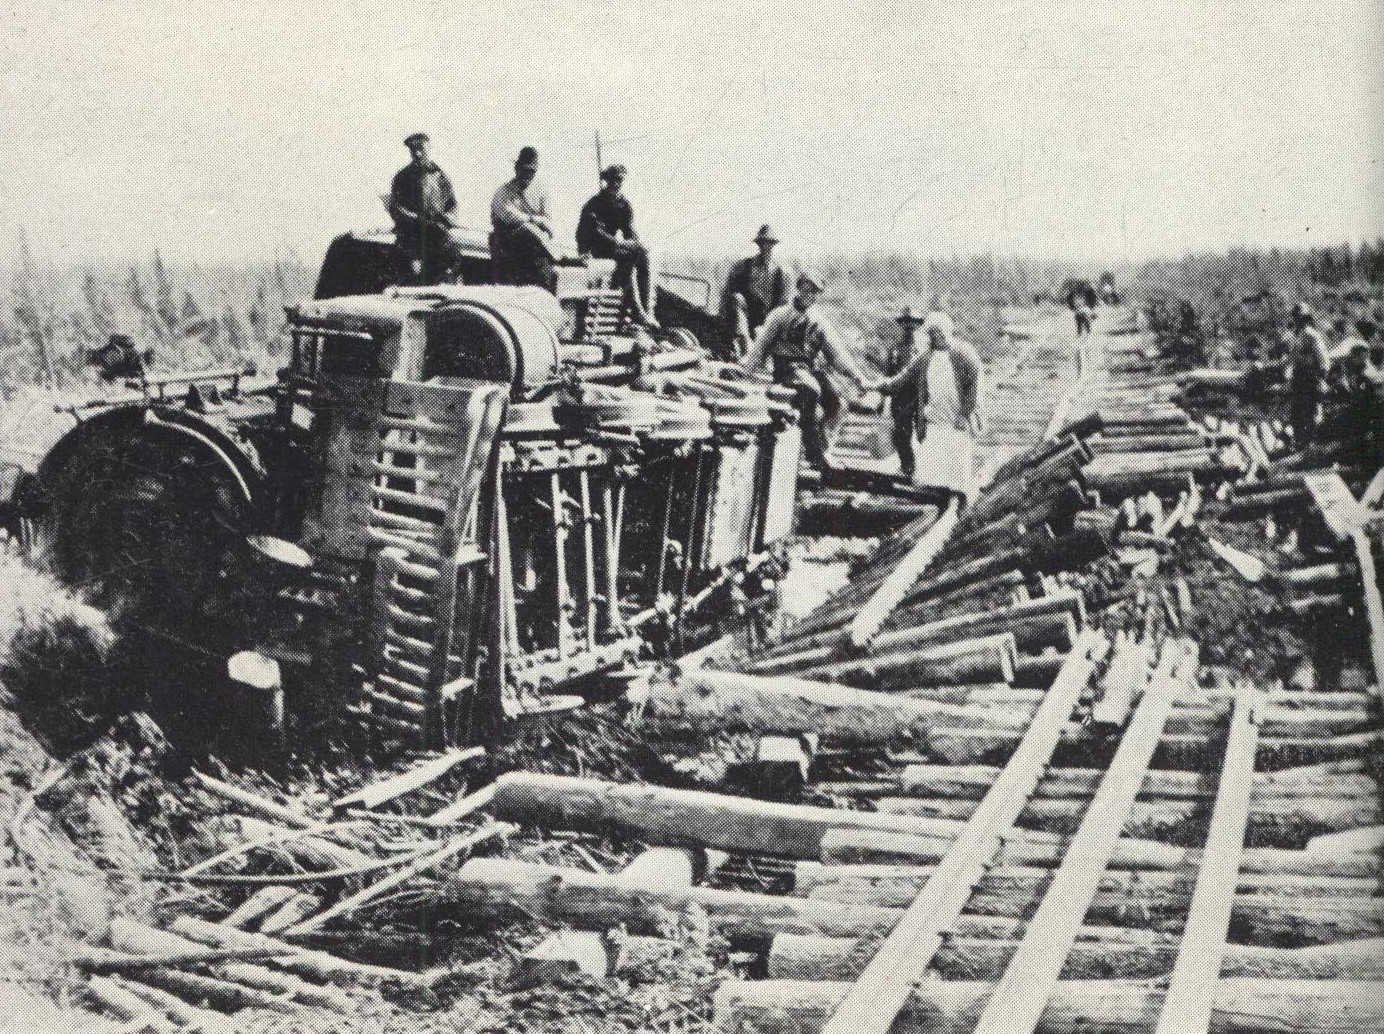 Group of men sitting on top of wrecked train engine